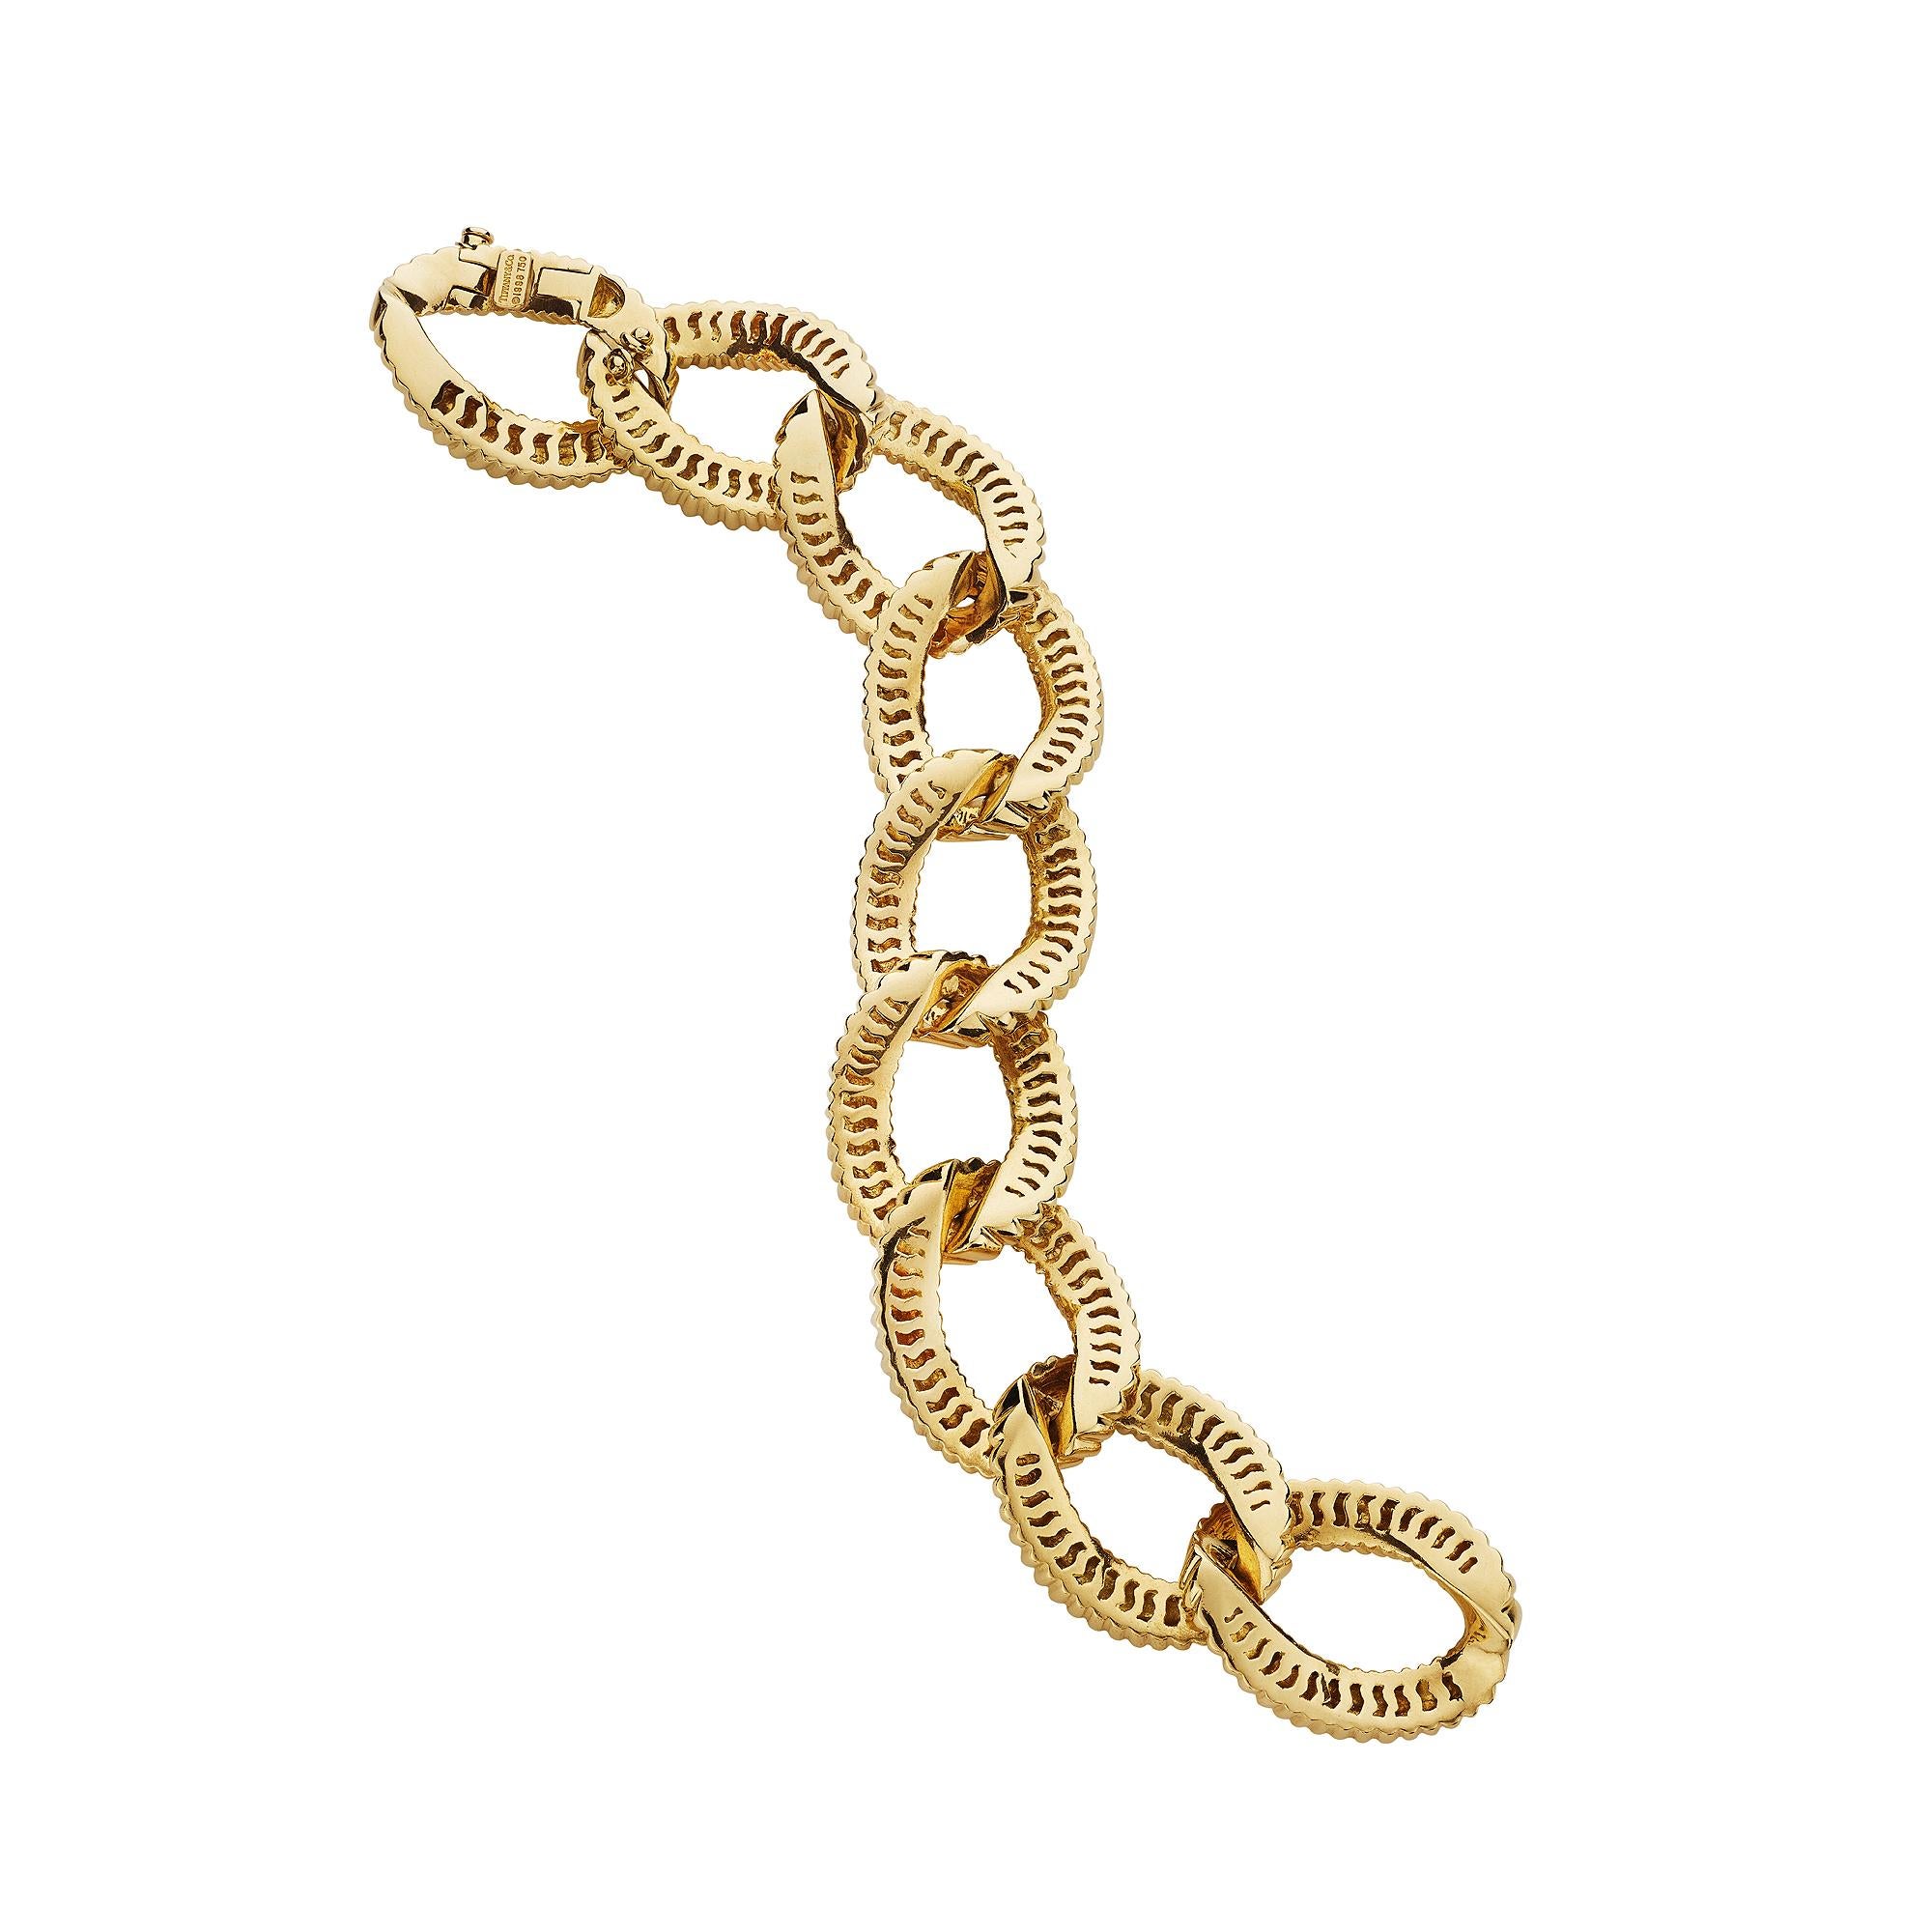 Tiffany & Co. Modernist Gold Textured Link Bracelet In Excellent Condition For Sale In Greenwich, CT